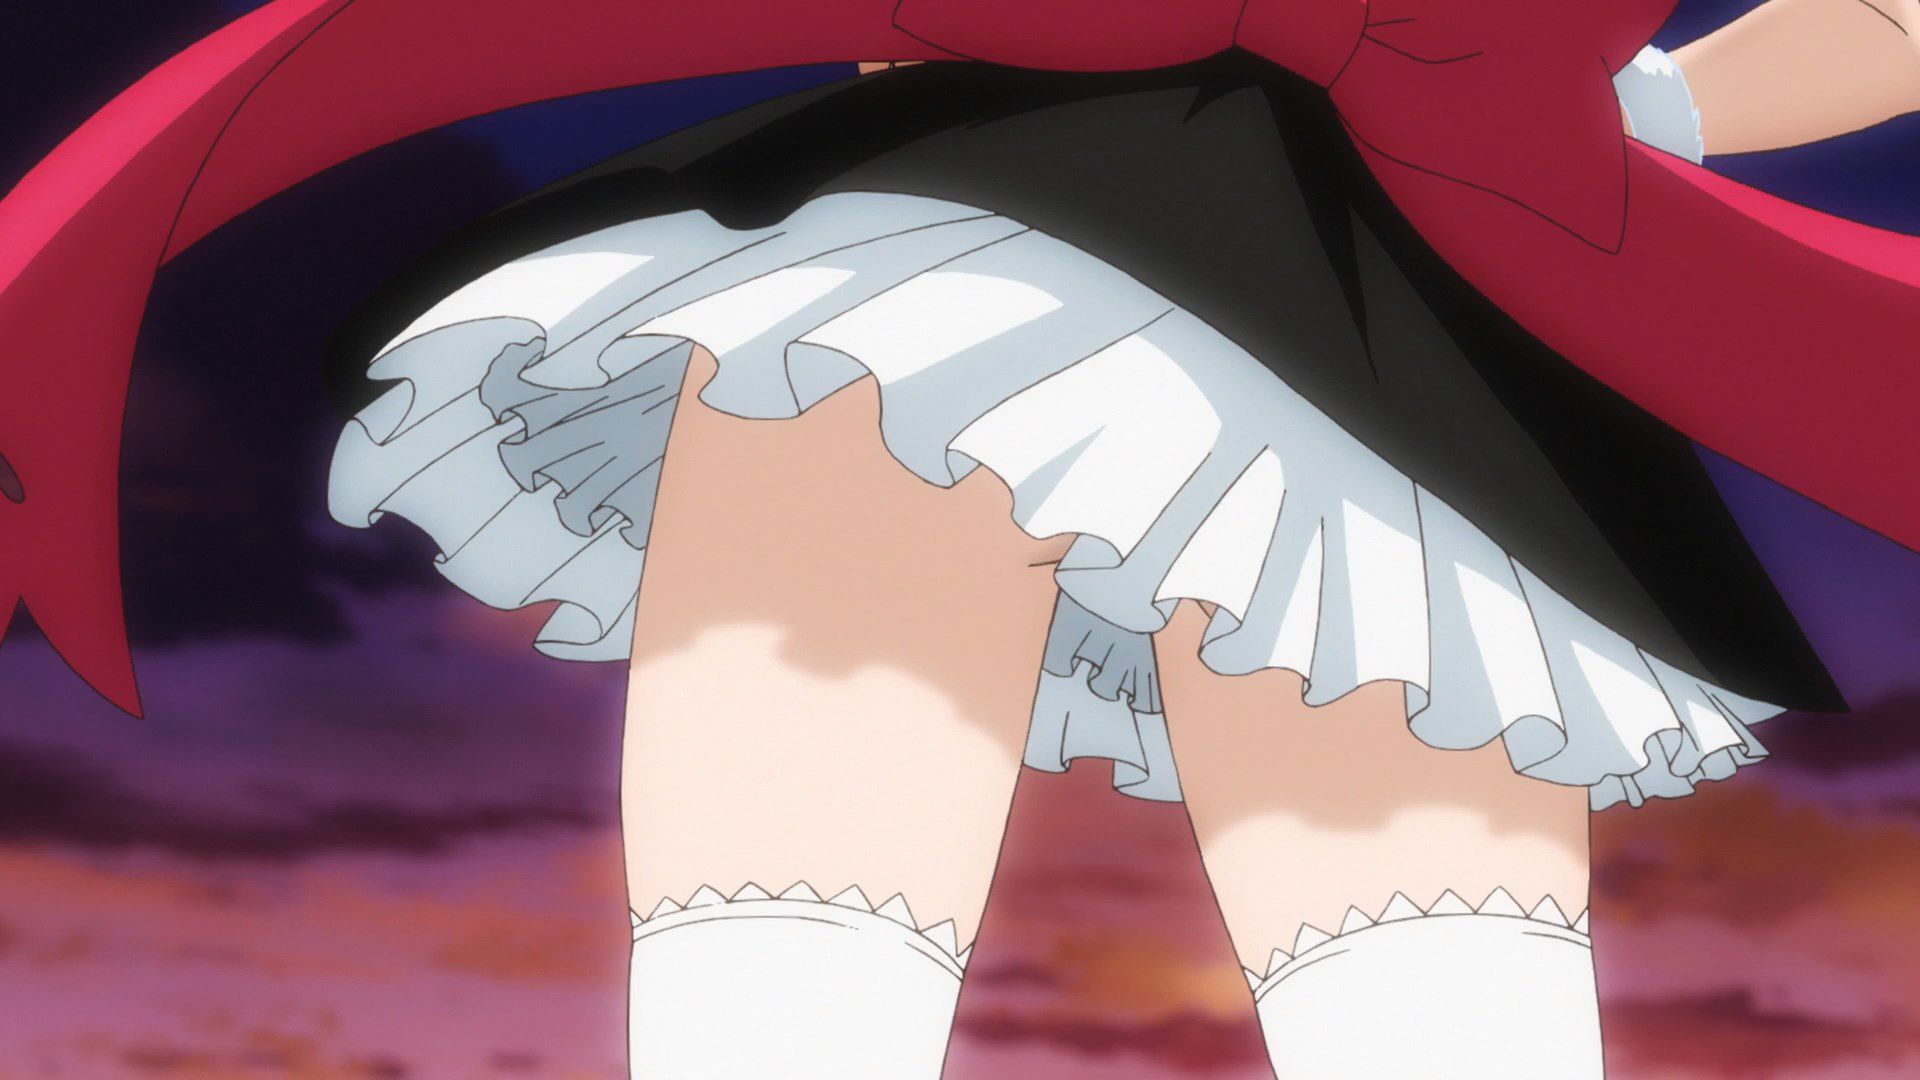 [God images] "love live! ' Μm ' PV's leg is too erotic everyone wakes up to a leg fetish of wwwww 16